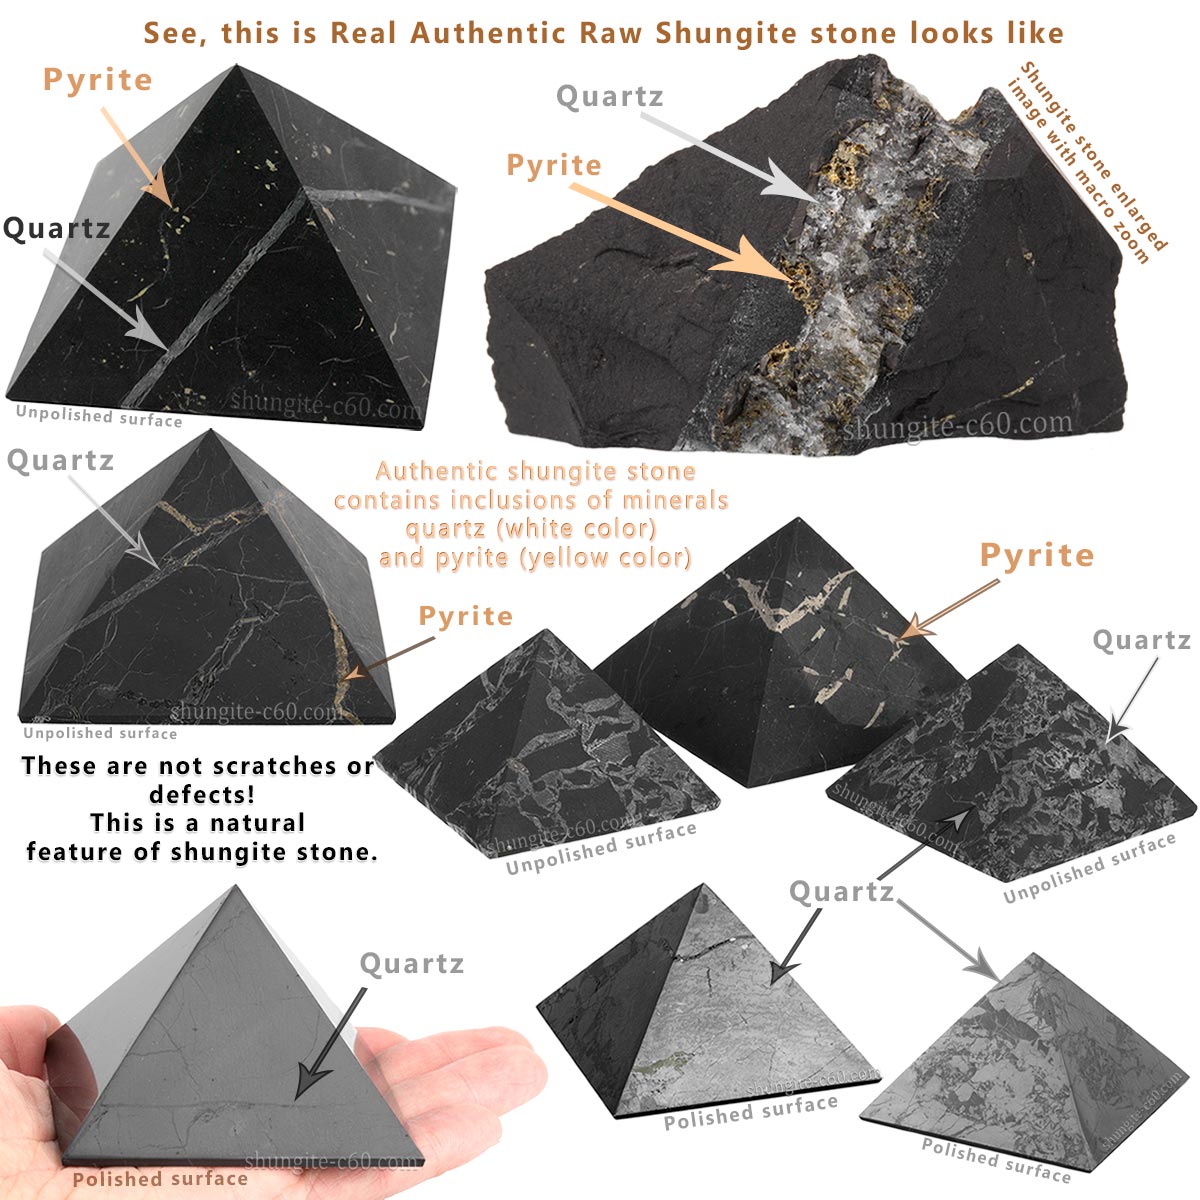 Minerals of quartz and pyrite in the composition of shungite